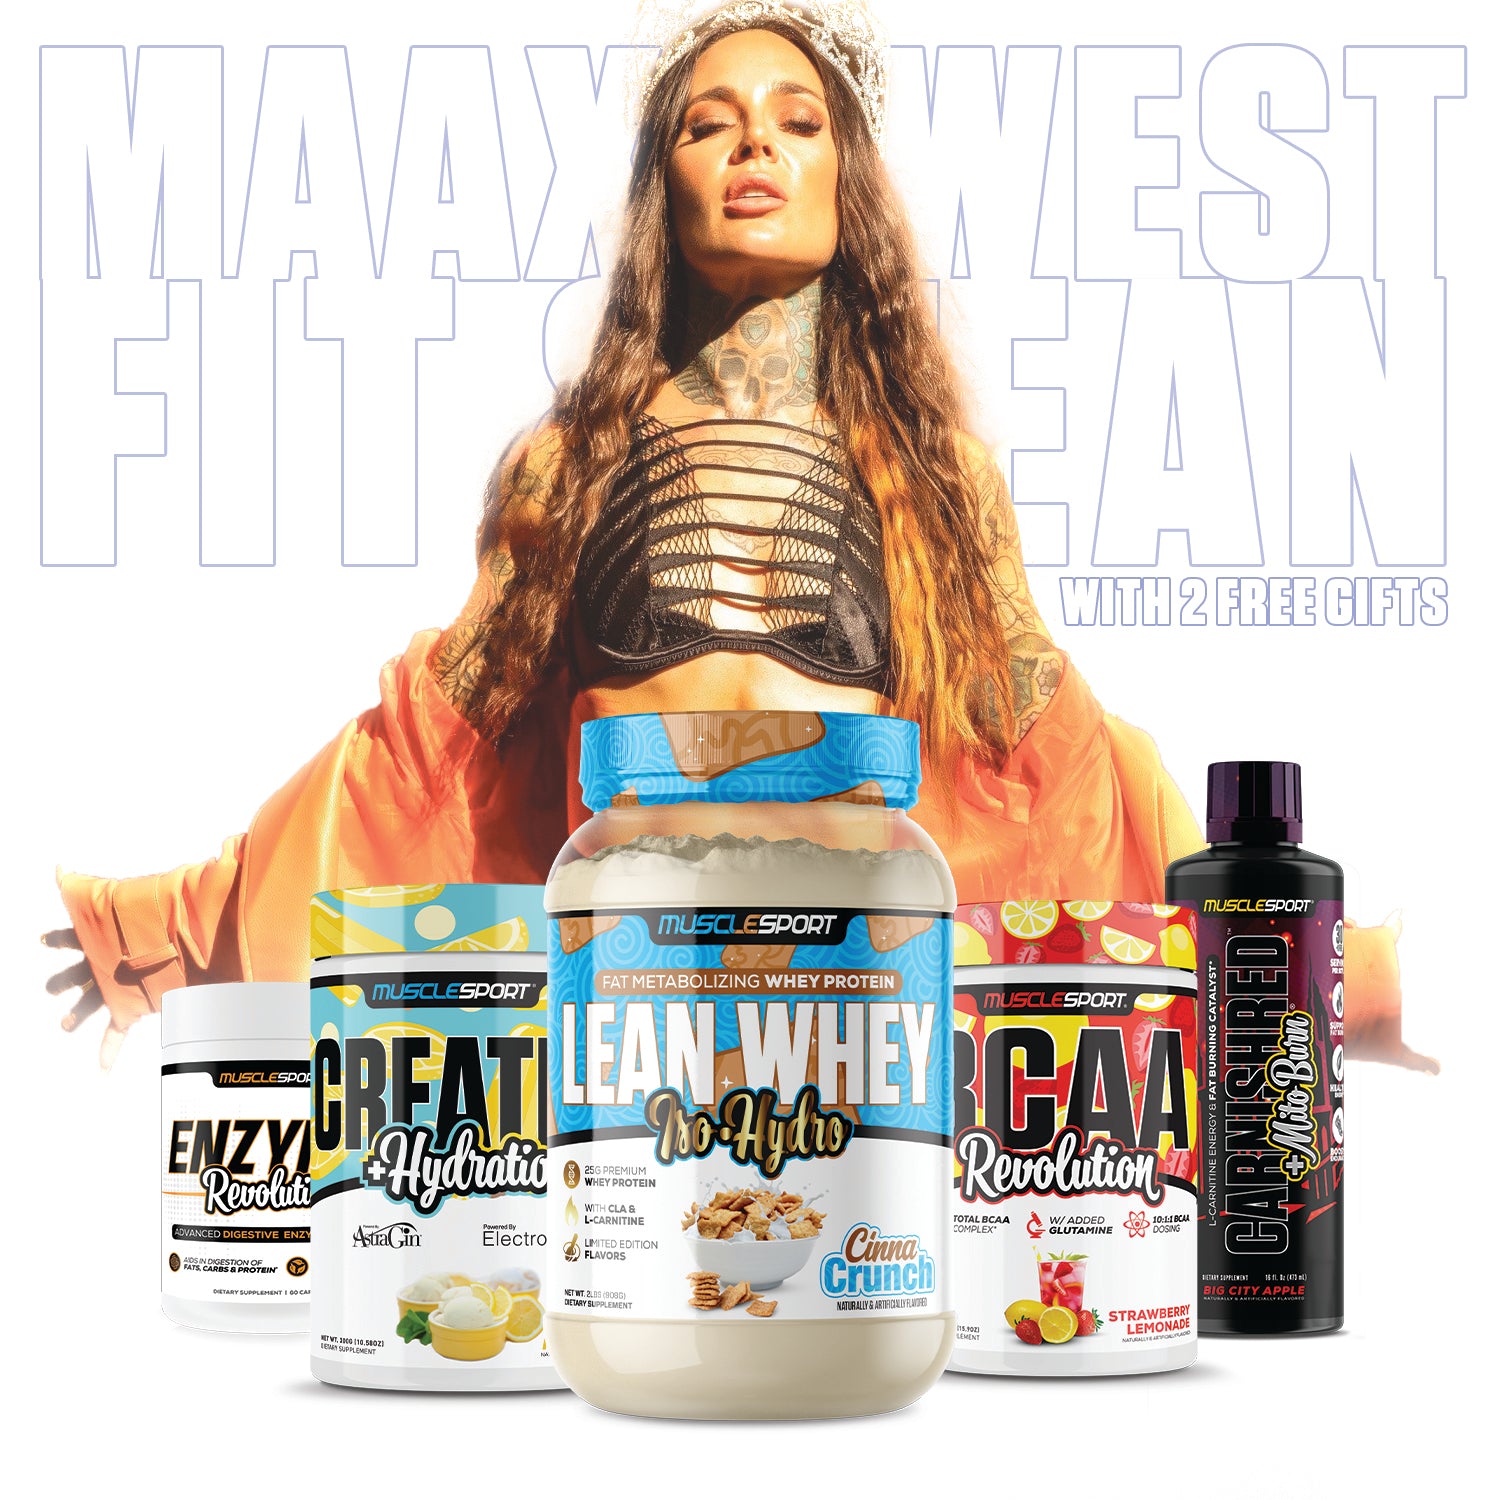 MaAXx's Fit & Lean Stack - Inspired by WBFF Champion MAAXX West!